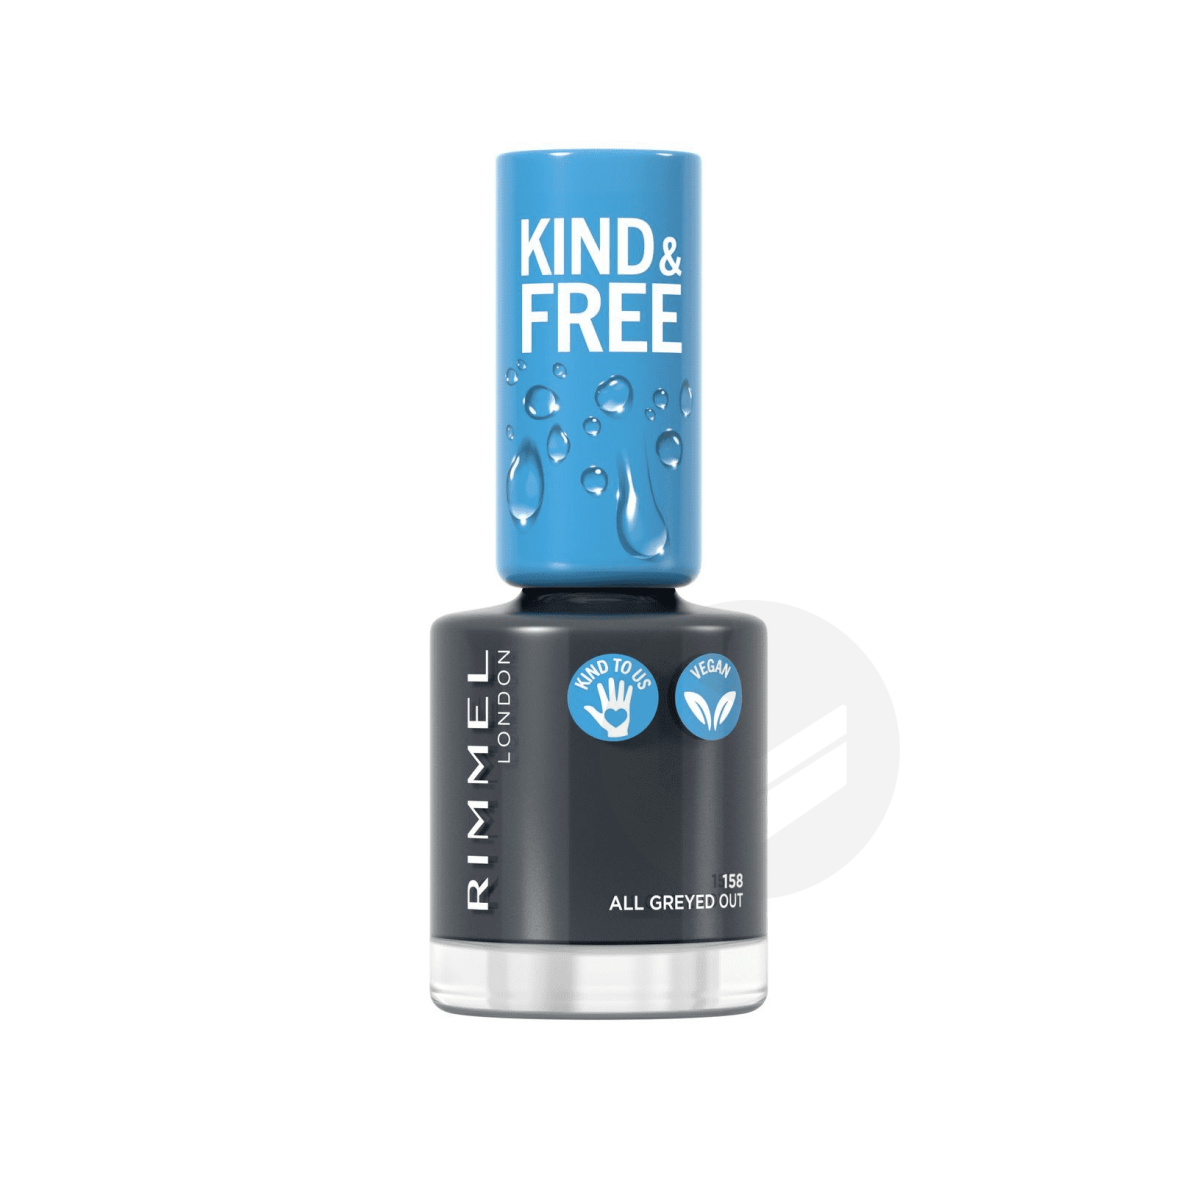 Vernis à ongles Kind & Free 158 All Greyed Out 8ml